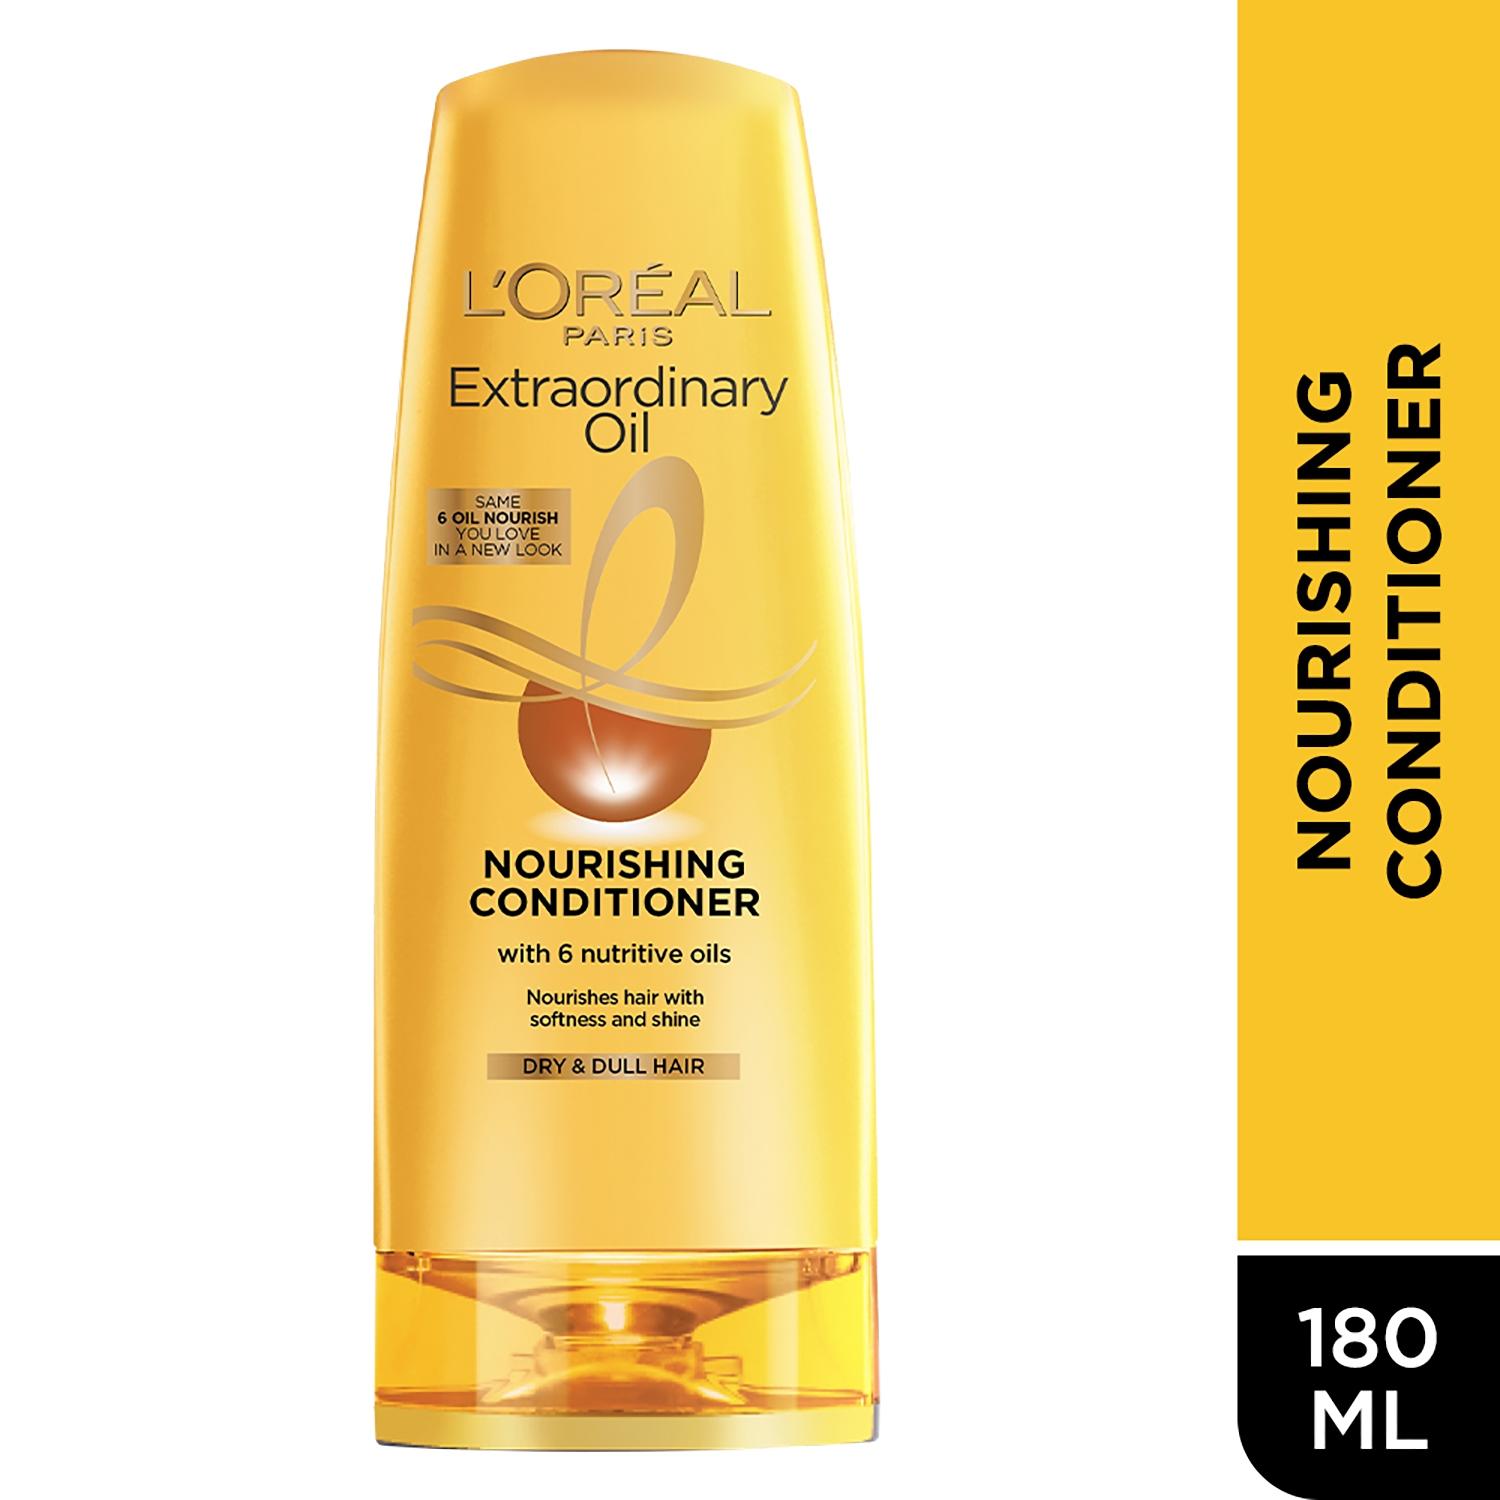 l'oreal-paris-extraordinary-oil-nourishing-conditioner-for-dry-&-dull-hair-(180ml)